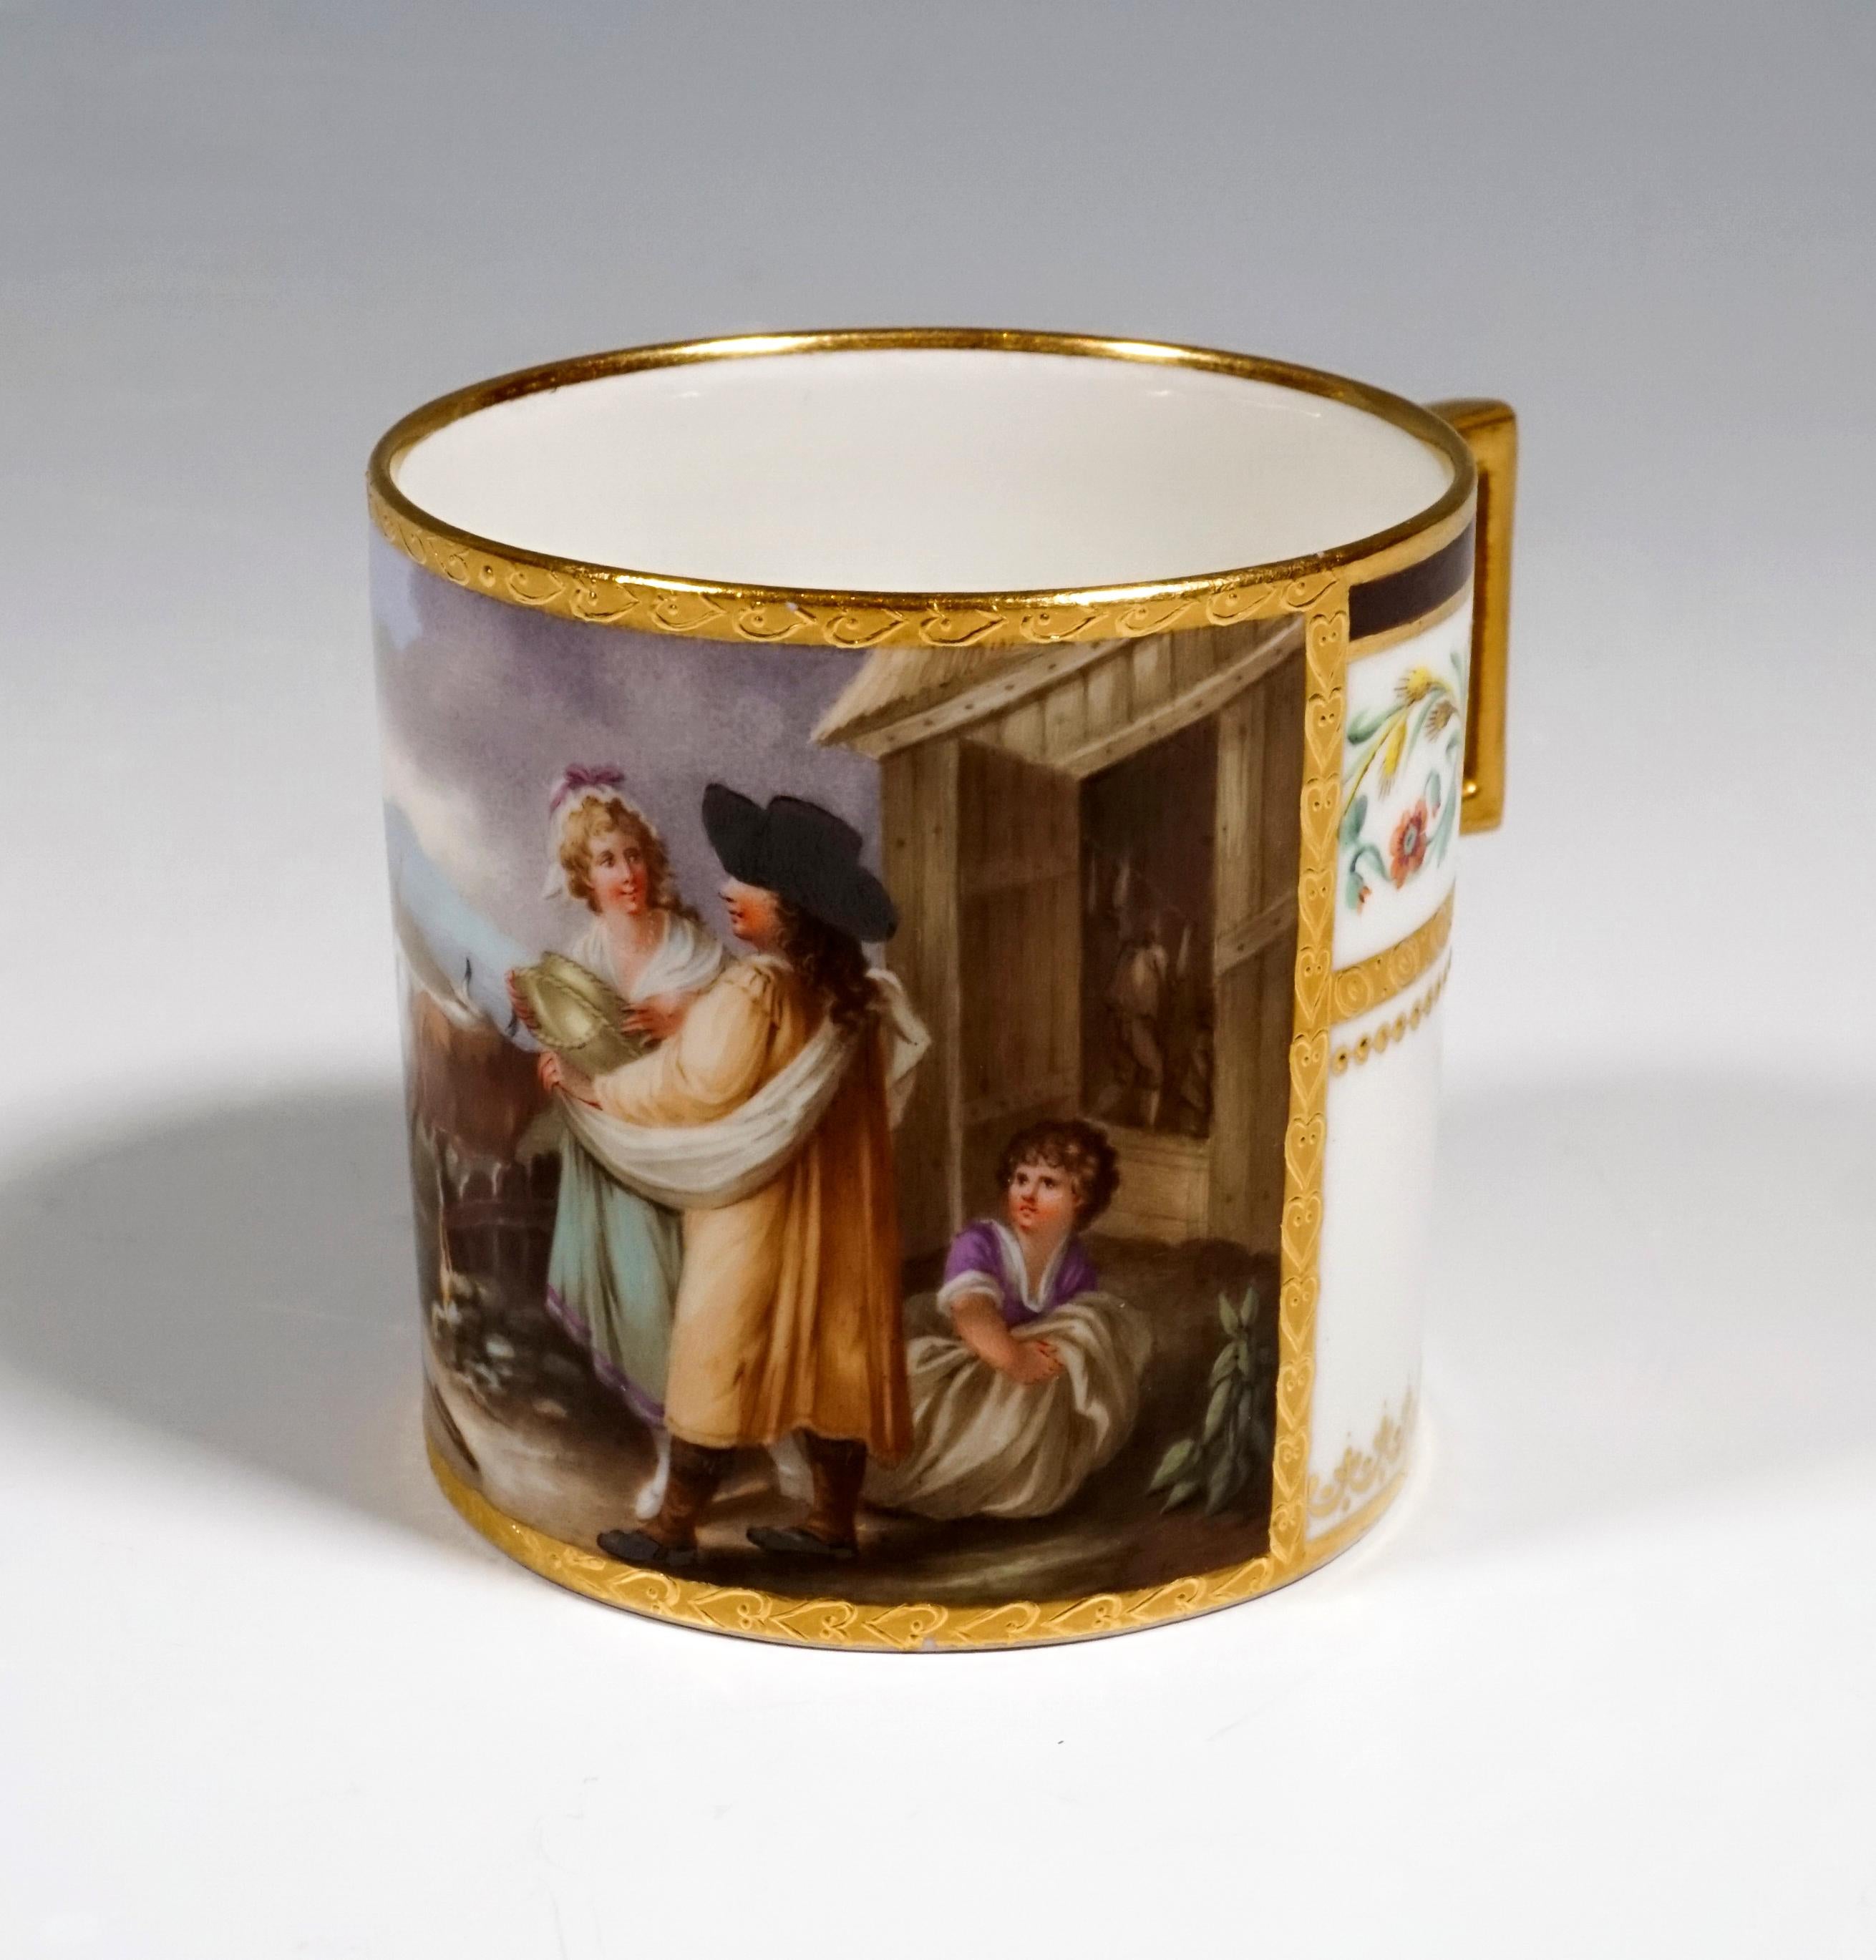 Austrian Viennese Imperial Porcelain Collecting Cup with Genre Scene, Sorgenthal, 1801